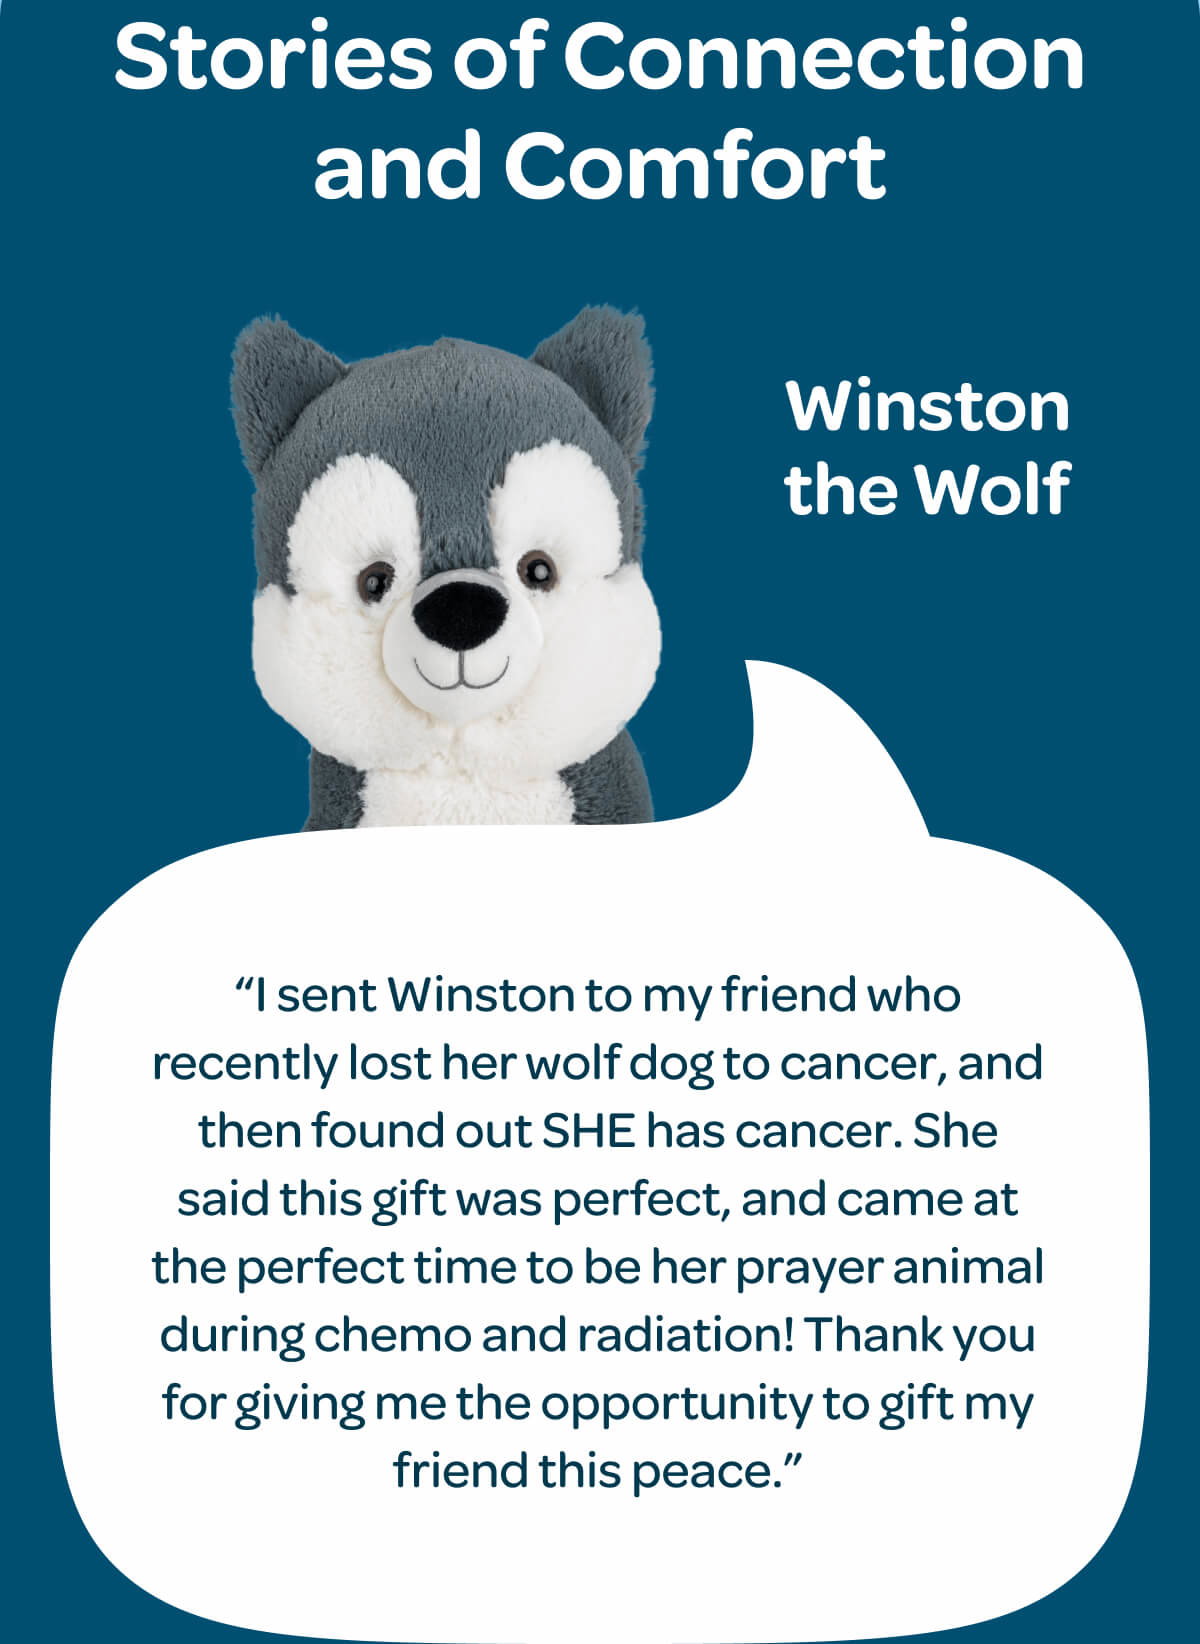 Stories of Connection and Comfort. Winston the Wolf. “I sent Winston to my friend who recently lost her wolf dog to cancer, and then found out SHE has cancer. She said this gift was perfect, and came at the perfect time to be her prayer animal during chemo and radiation! Thank you for giving me the opportunity to gift my friend this peace.”